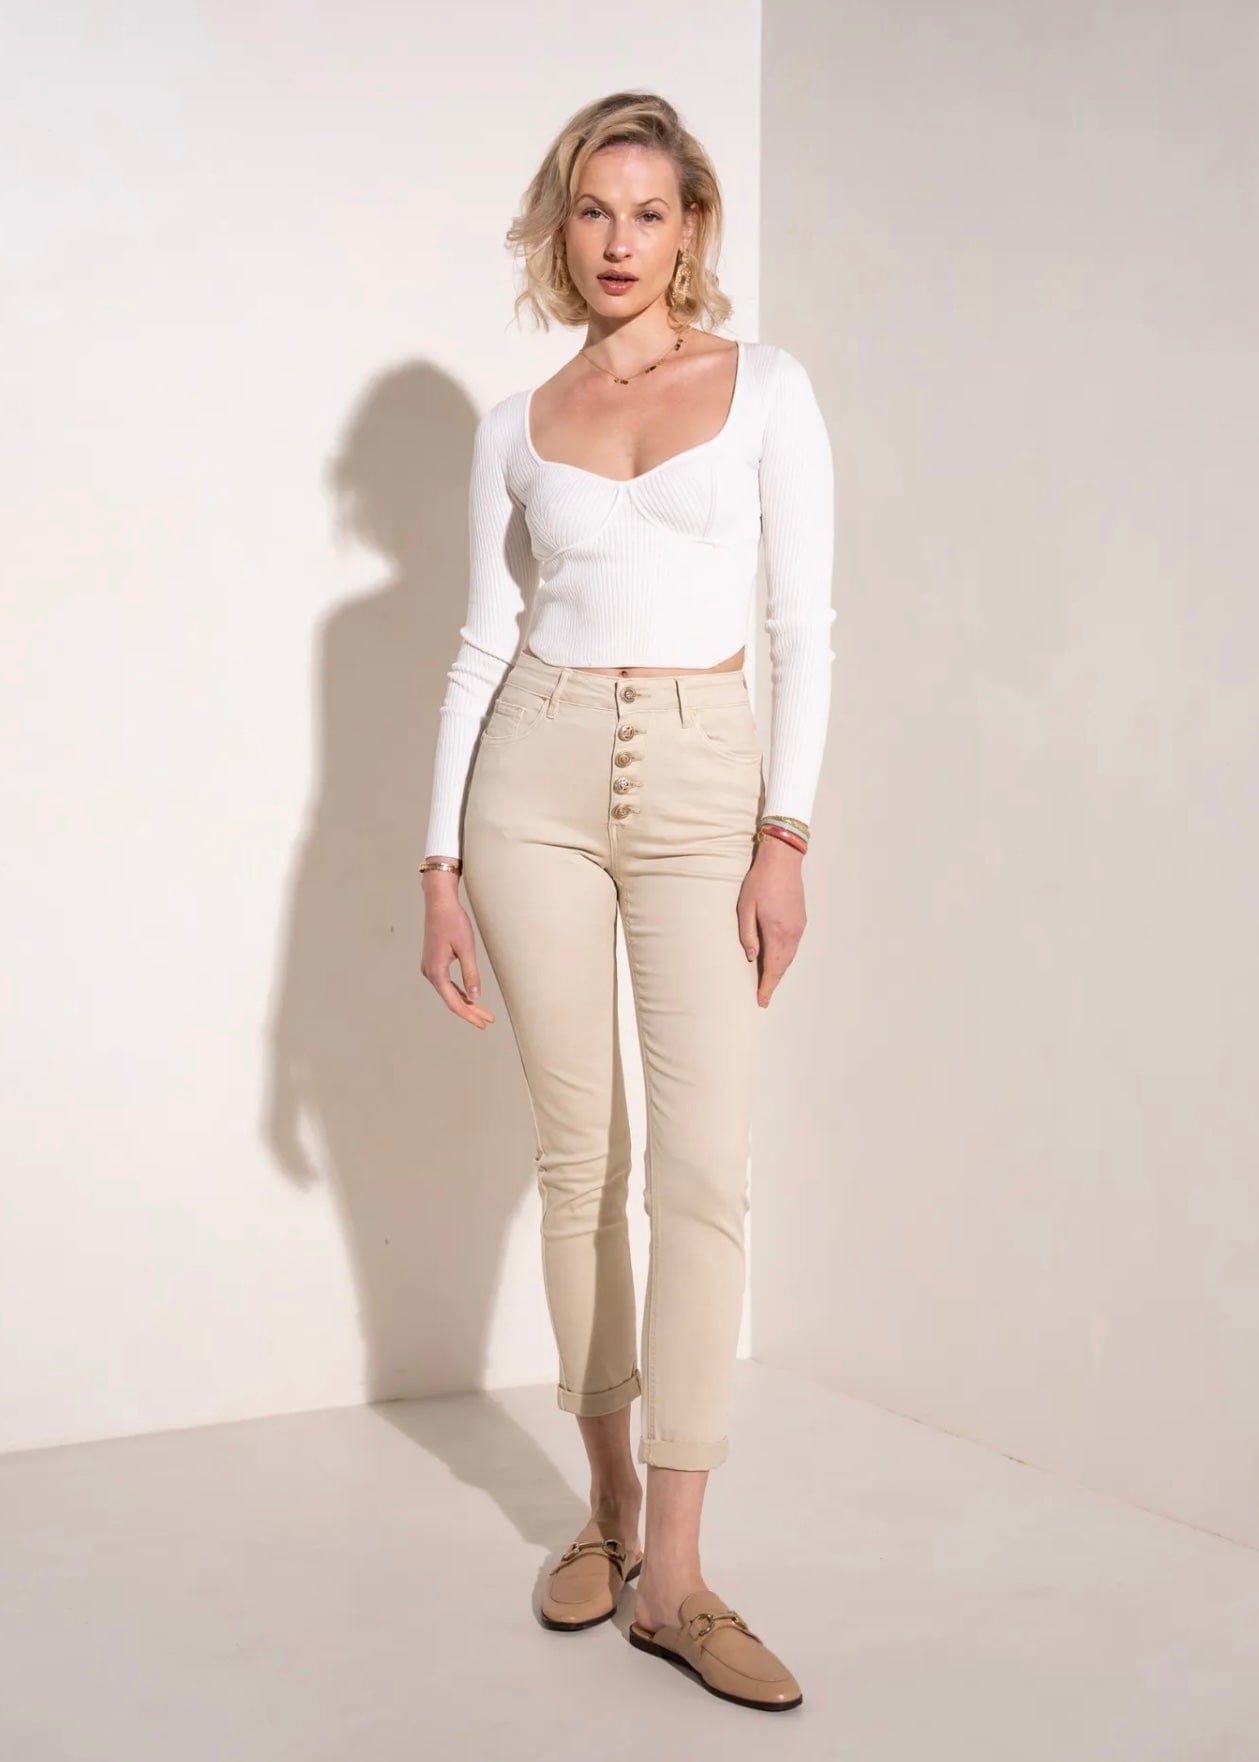 Mid-Rise Beige Jeans with Gold front Buttons - Tribute StoreTRIBUTE